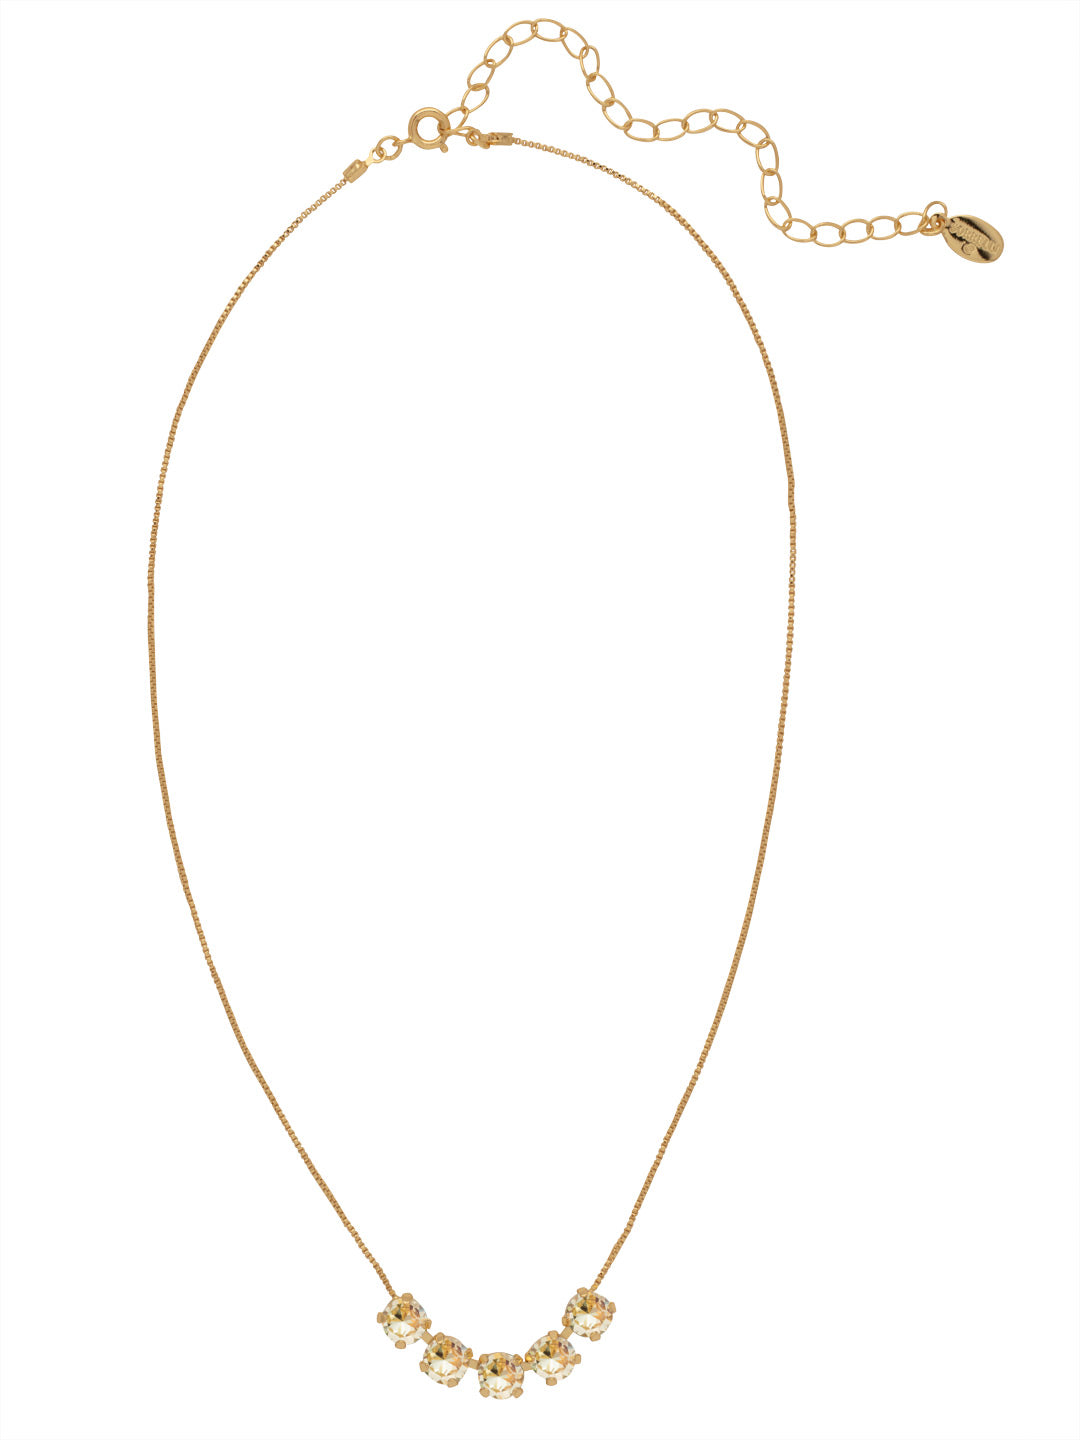 Shaughna Tennis Necklace - NFC84BGCCH - <p>The Shaughna Tennis Necklace features five crystals on a delicate adjustable chain. From Sorrelli's Crystal Champagne collection in our Bright Gold-tone finish.</p>